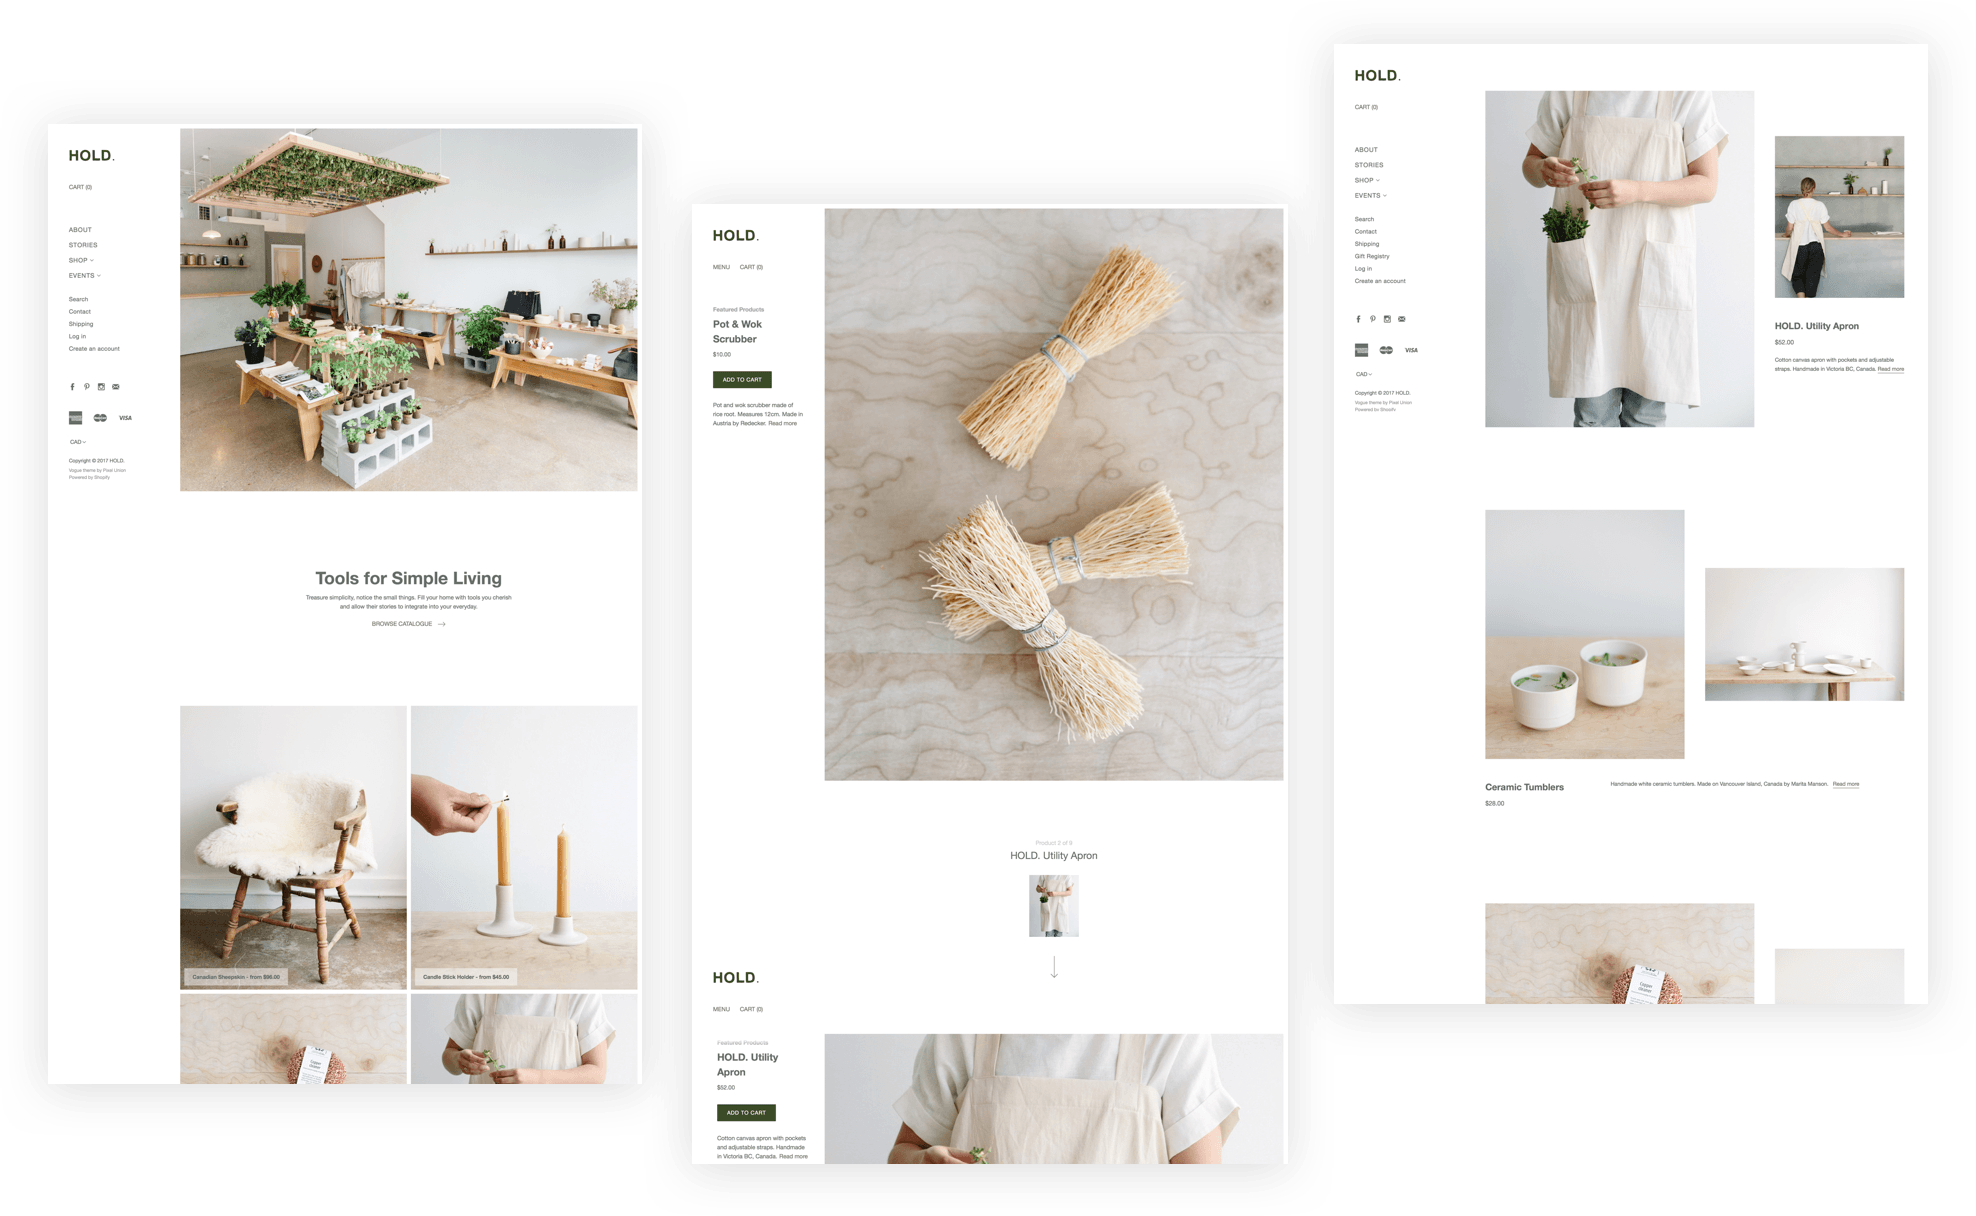 Hold webpages using Vogue Shopify theme